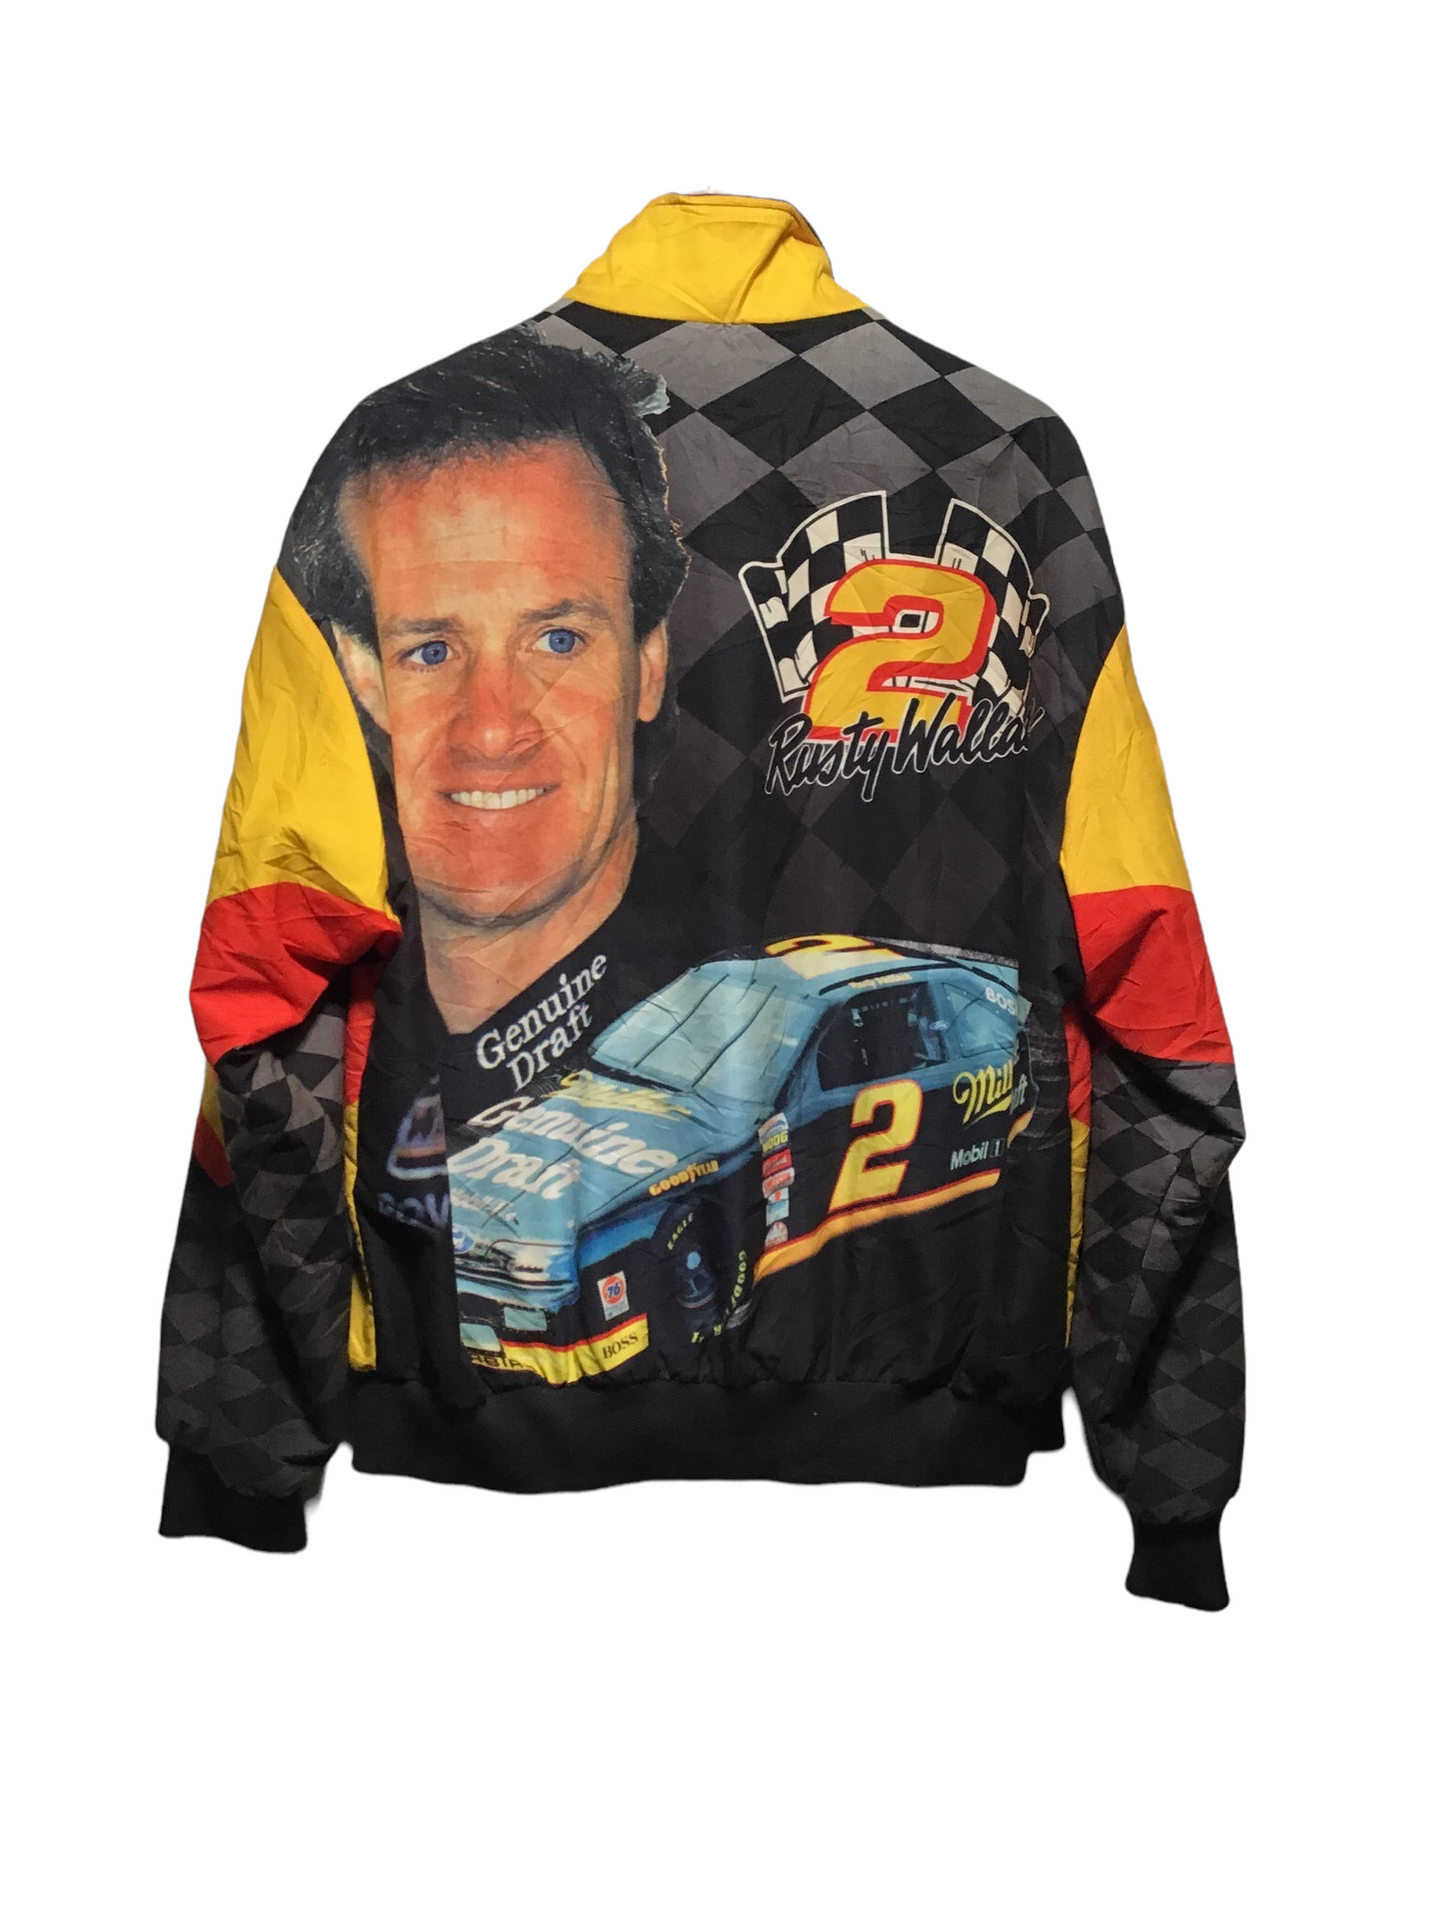 Rusty Wallace Racing Bomber Jacket (Size L)